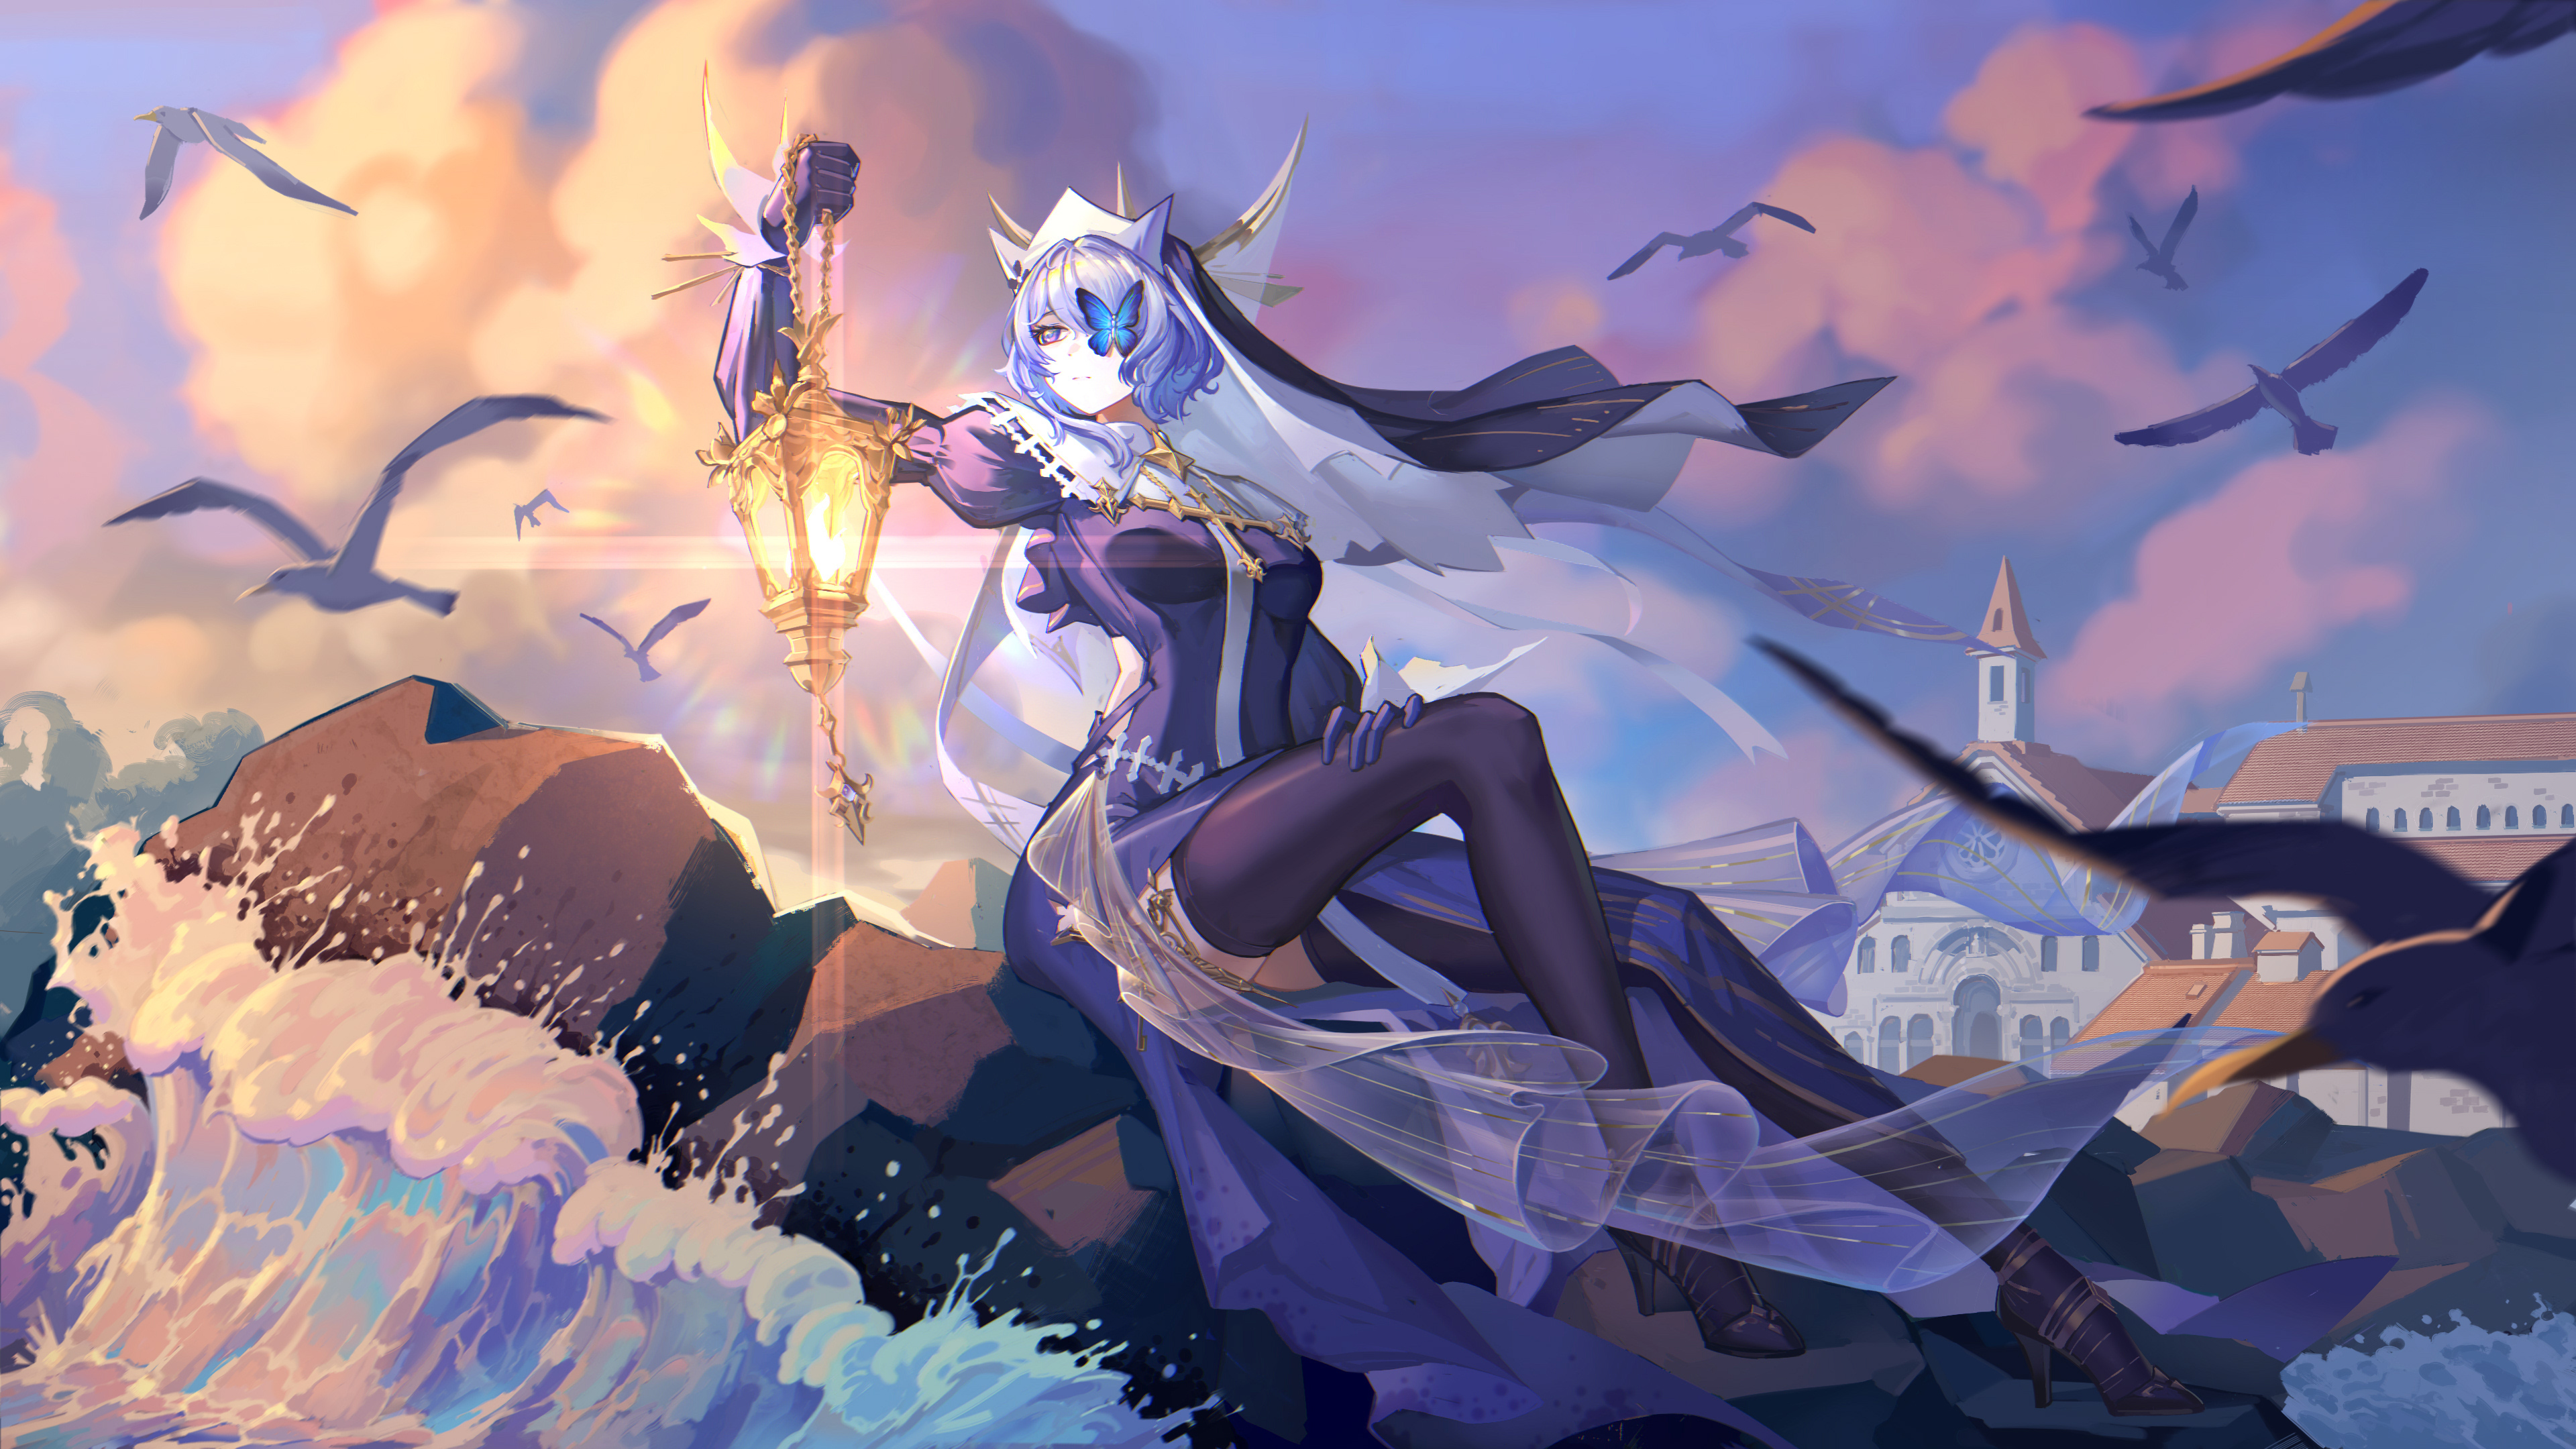 Anime 3840x2160 Arknights looking away Whisperain (Arknights) sea looking sideways animals sunset women outdoors depth of field purple hair purple eyes architecture closed mouth seagulls Zangfang long sleeves blue butterflies waves blue dress blue gloves sitting black thigh highs lantern blurry background one eye obstructed birds rocks sky clouds anime girls high heels one arm up evening water butterfly orange sky outdoors